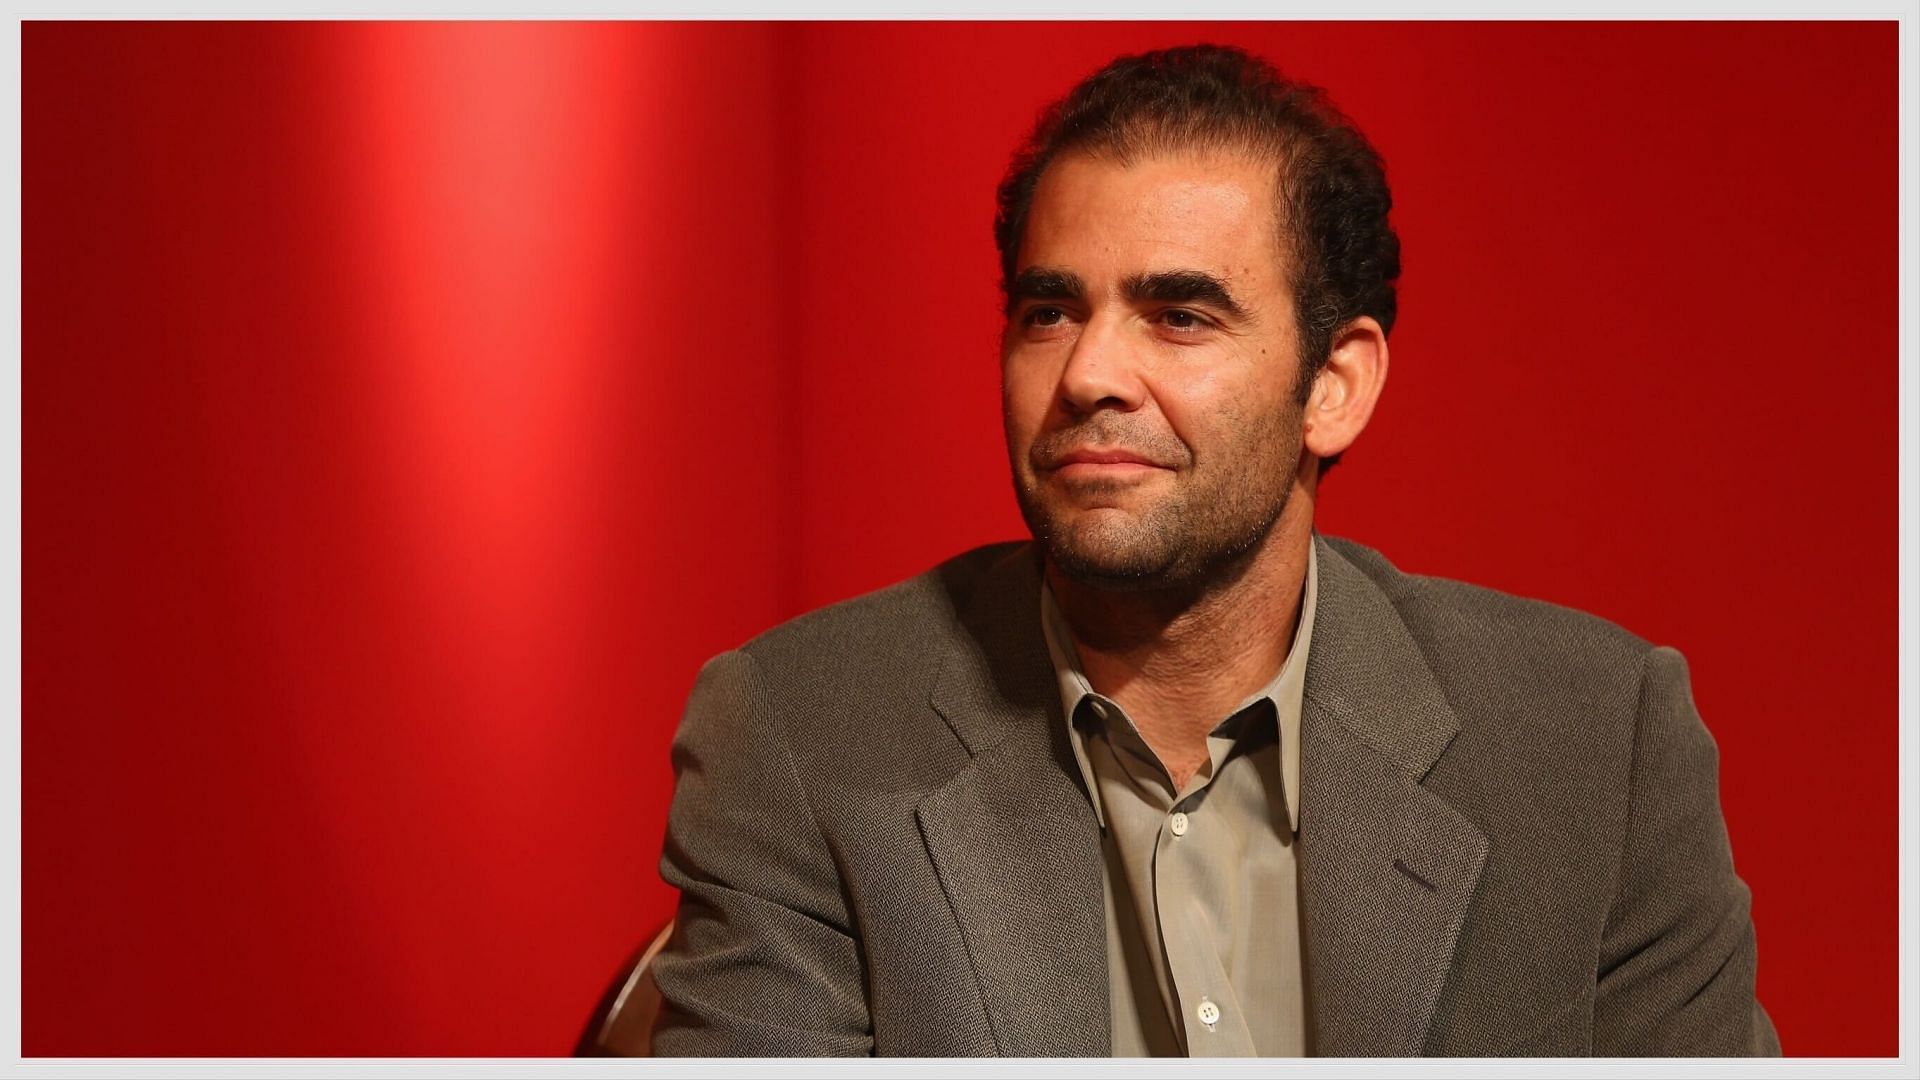 Pete Sampras won 14 Grand Slam titles but never won the French Open